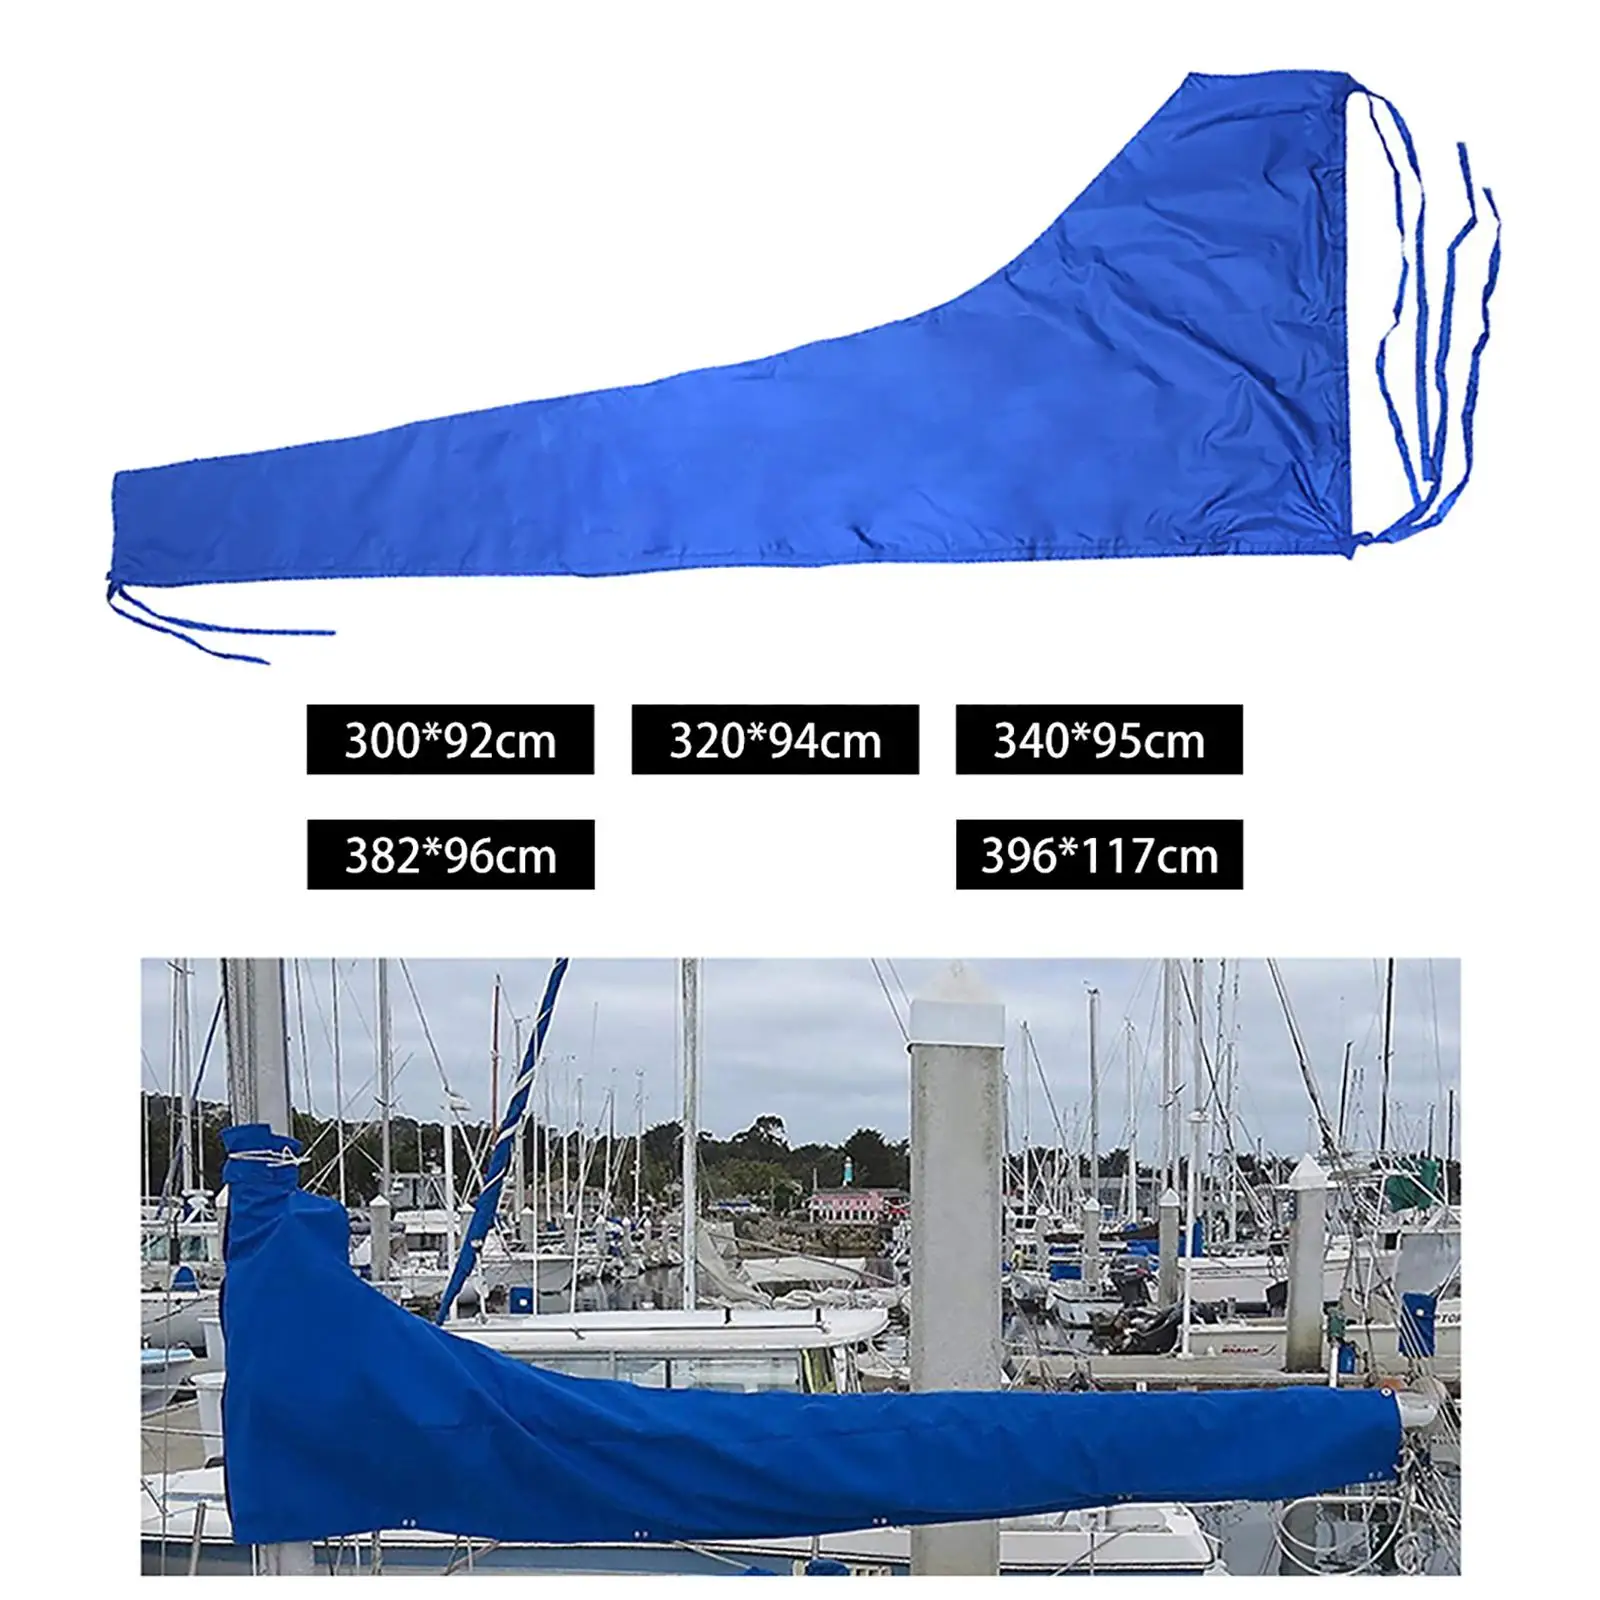 Waterproof Mainsail Cover Adjustable Strap Thickened Boat Accessories